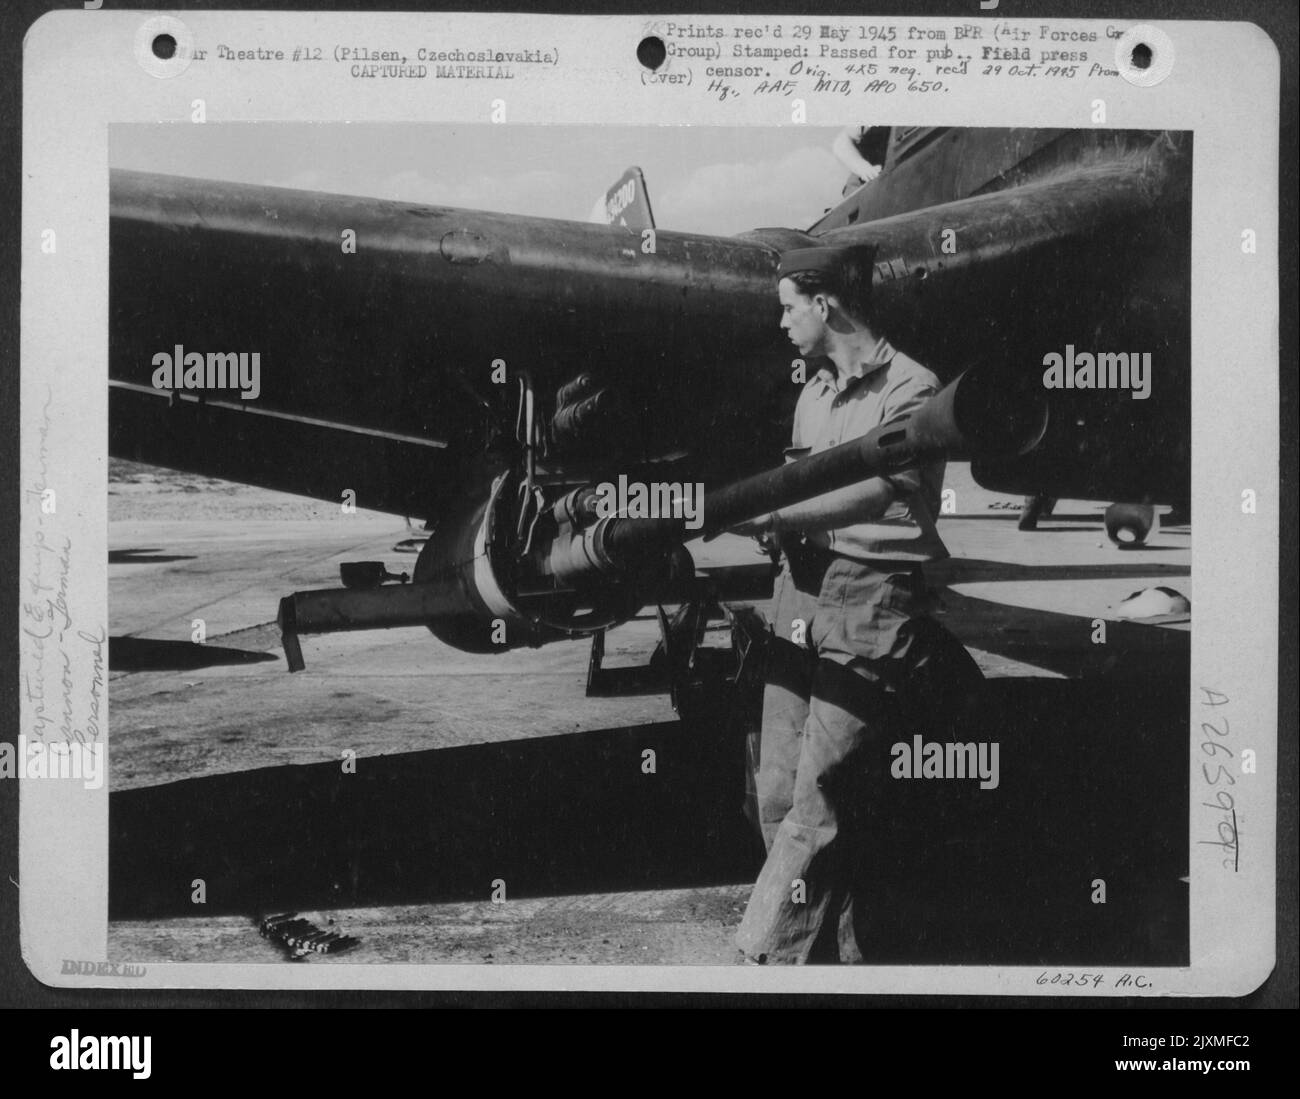 S/Sgt. Charles N. Culver, P.O. Box 283, Rosser, Texas, examines a 40 MM Cannon attached to the wing of a German JU-87 Stuka, used as an Anti-tank gun, at an airfield in Pilsen, CZECHOSLOVAKIA. Stock Photo